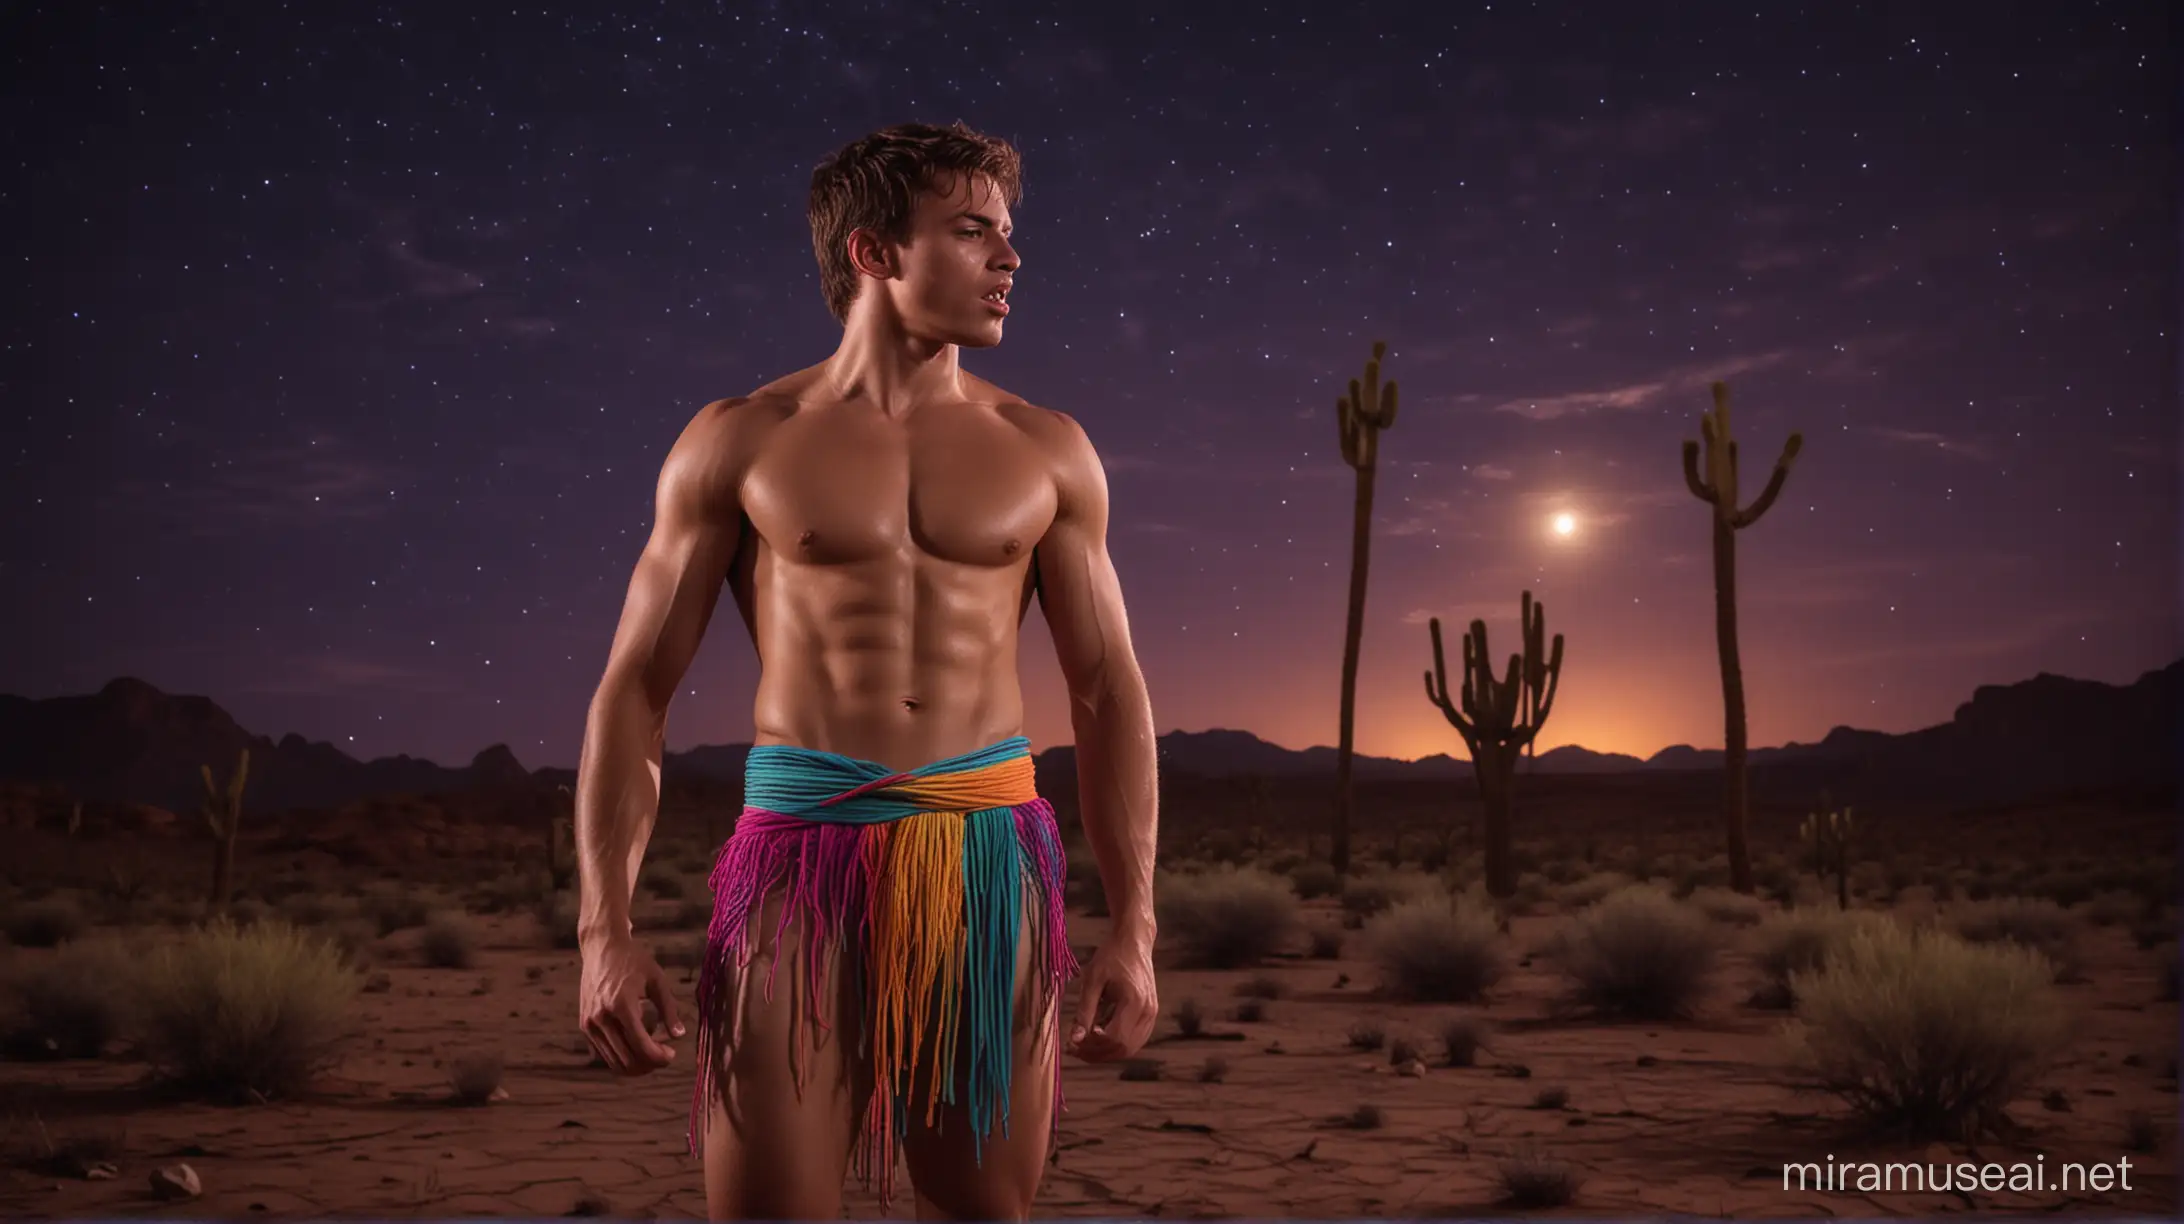 Sweaty muscular teenager boy in loincloth singing in the middle of the desert by night in neon colors ambient